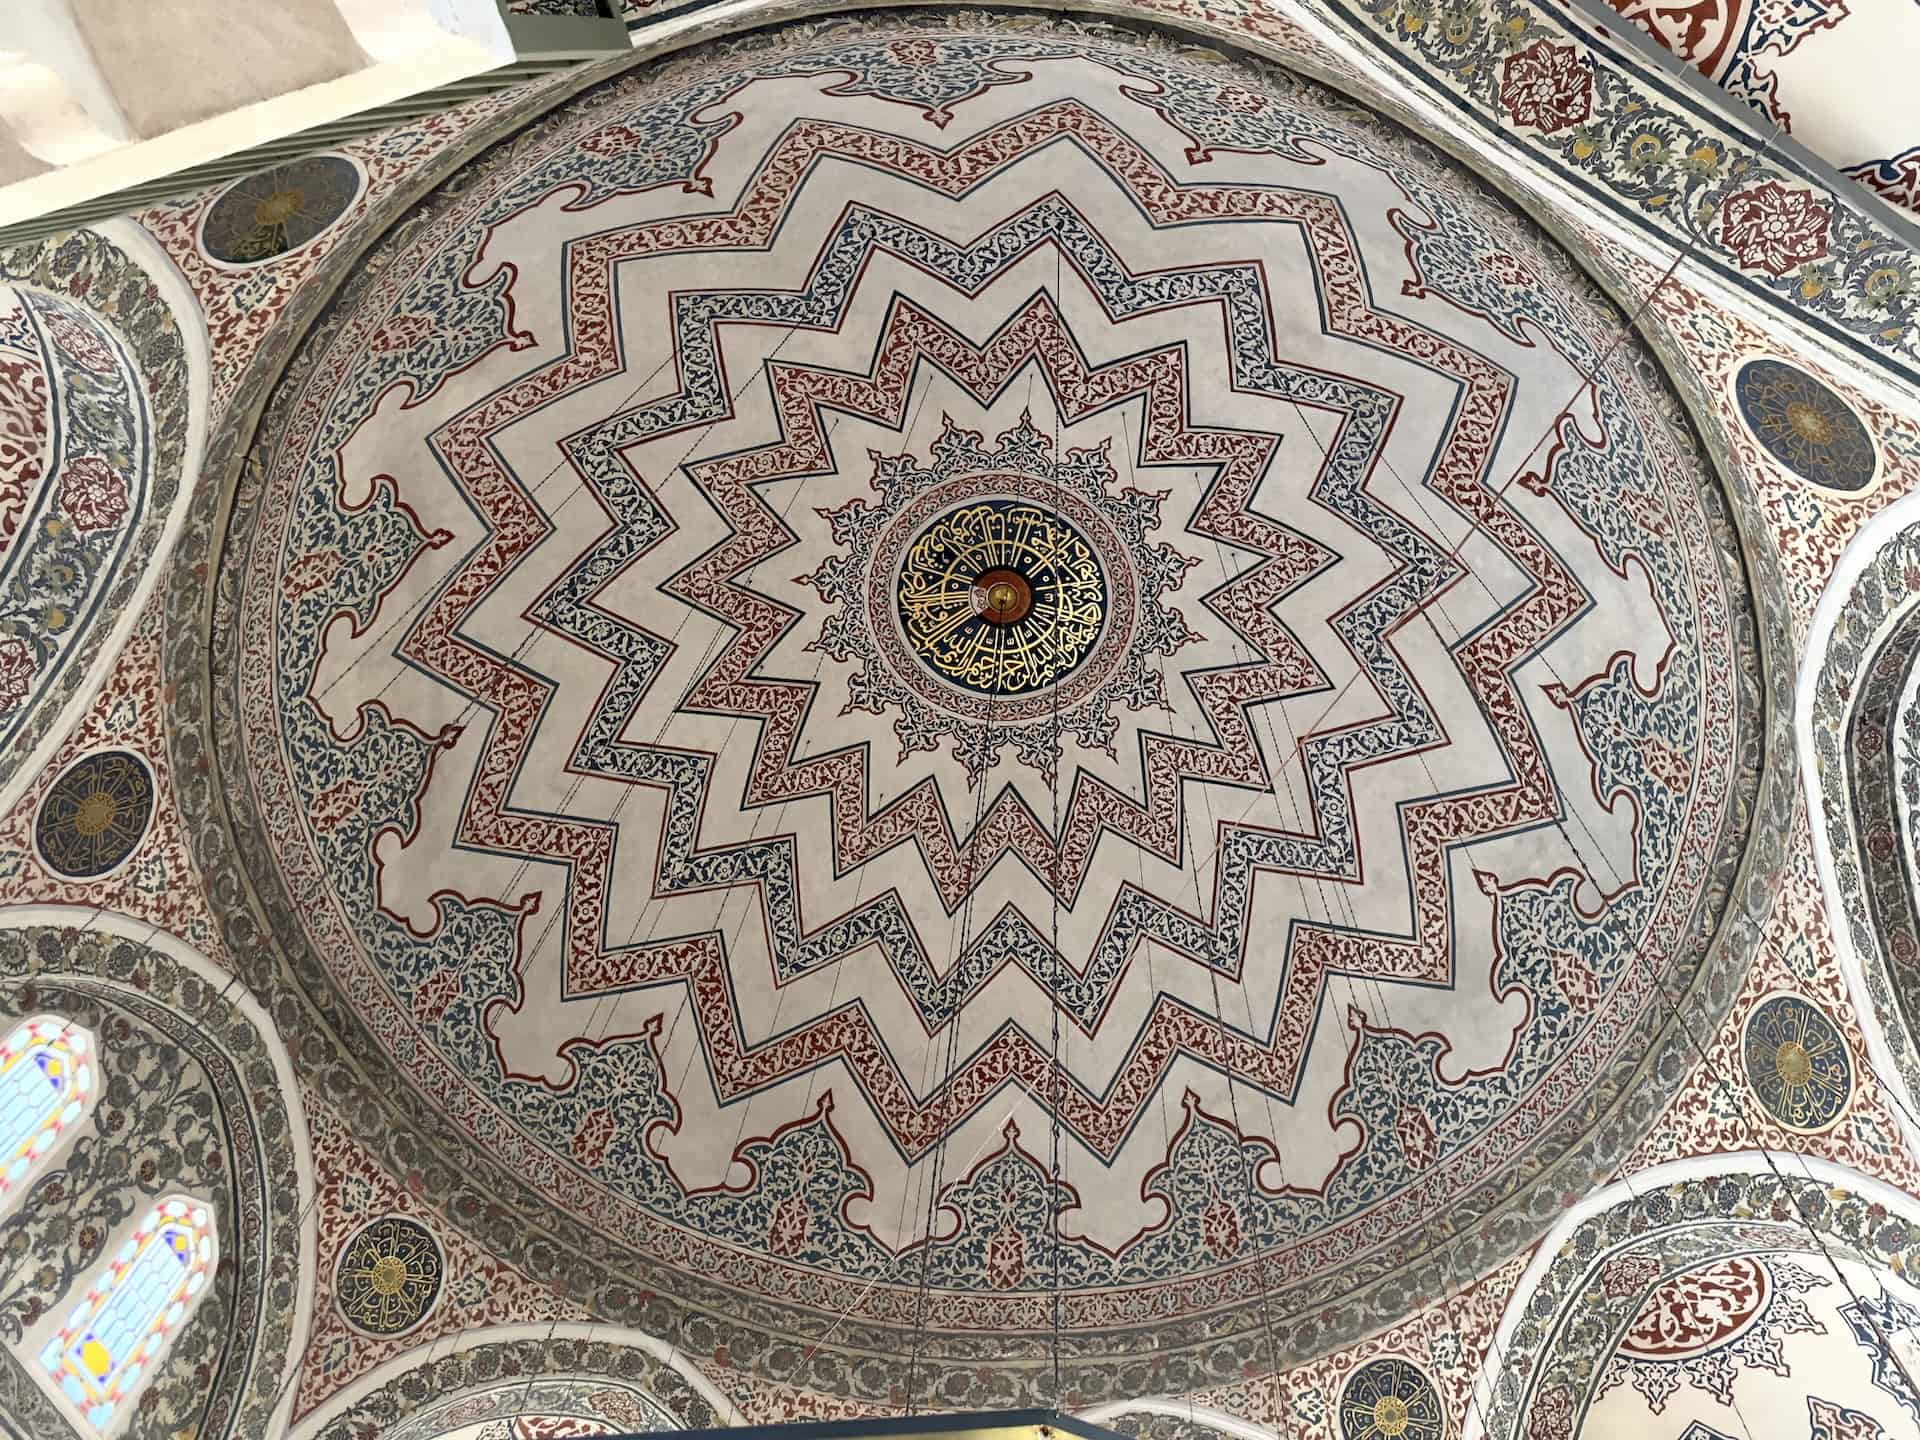 Dome of the Tomb of Ahmed I in Sultanahmet, Istanbul, Turkey